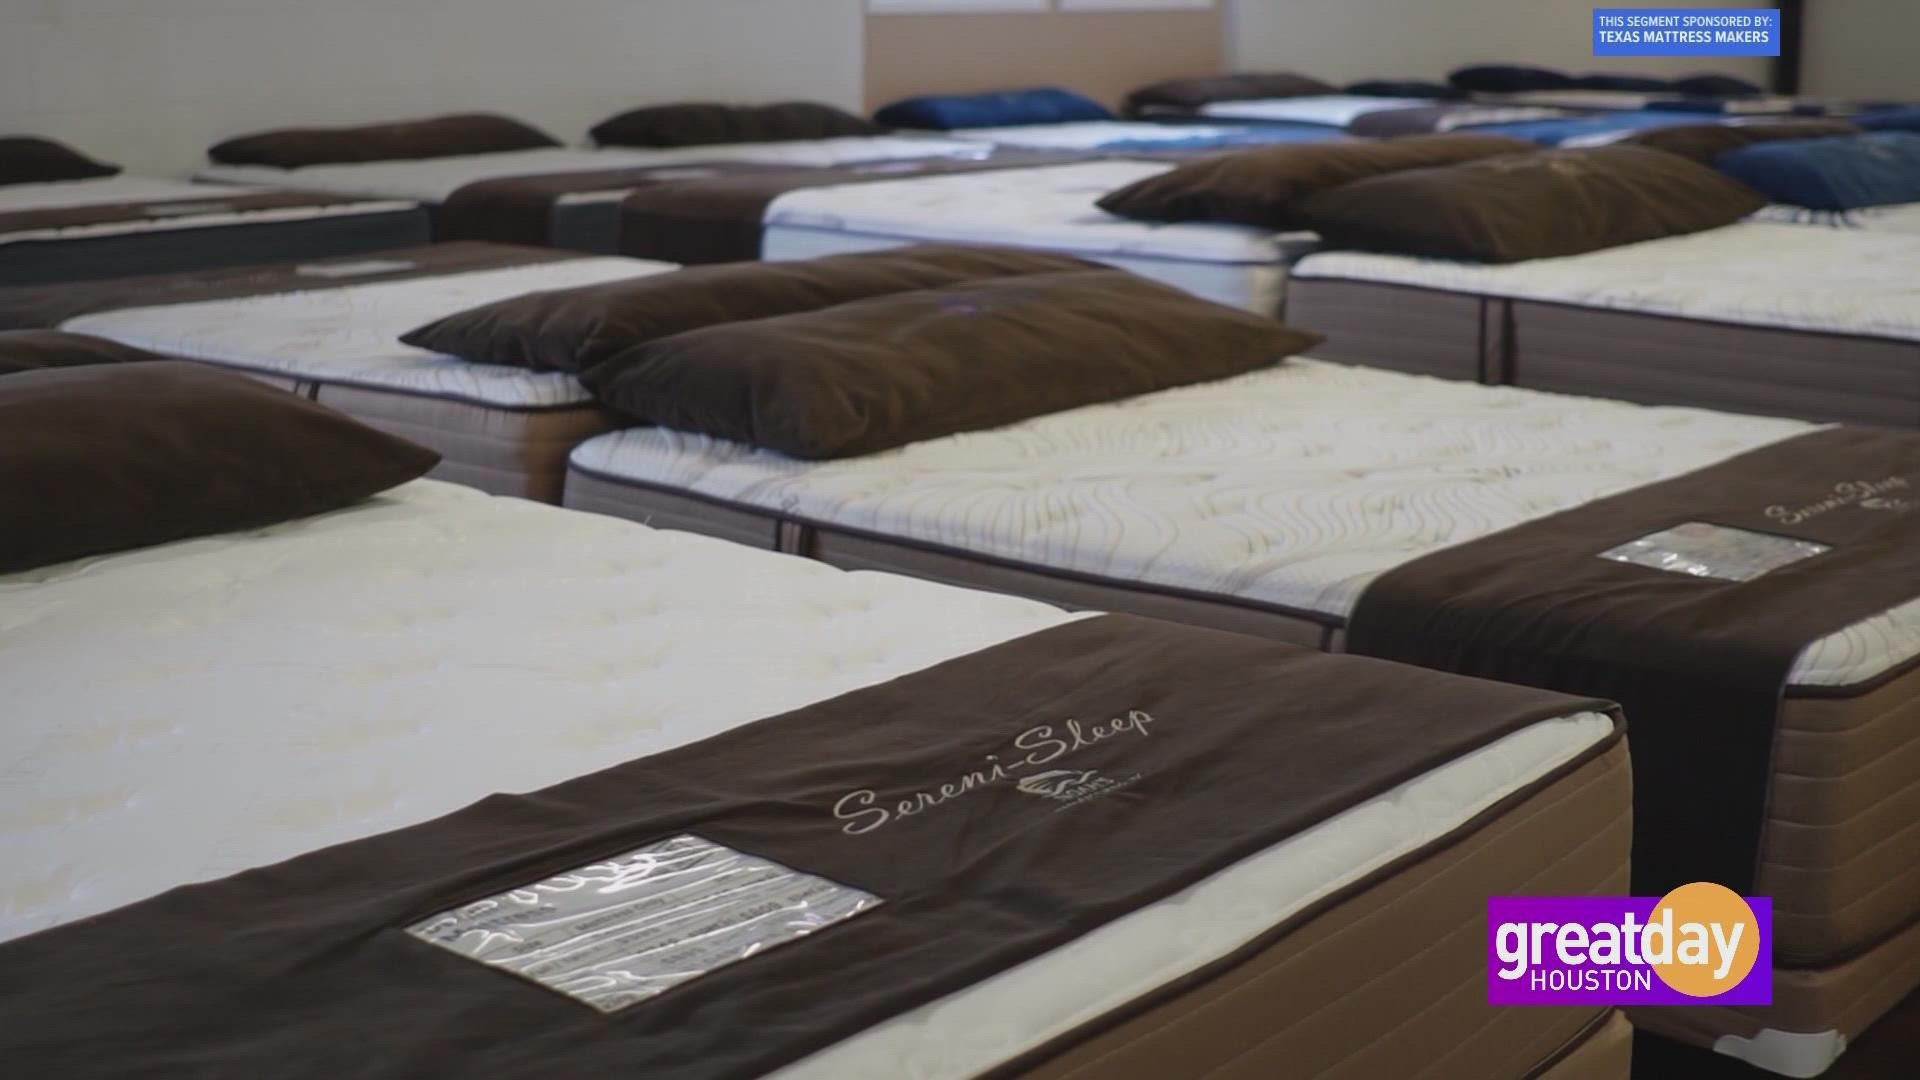 Texas Mattress Makers designs beds for you so you get a great night's sleep and wake up rested and ready.